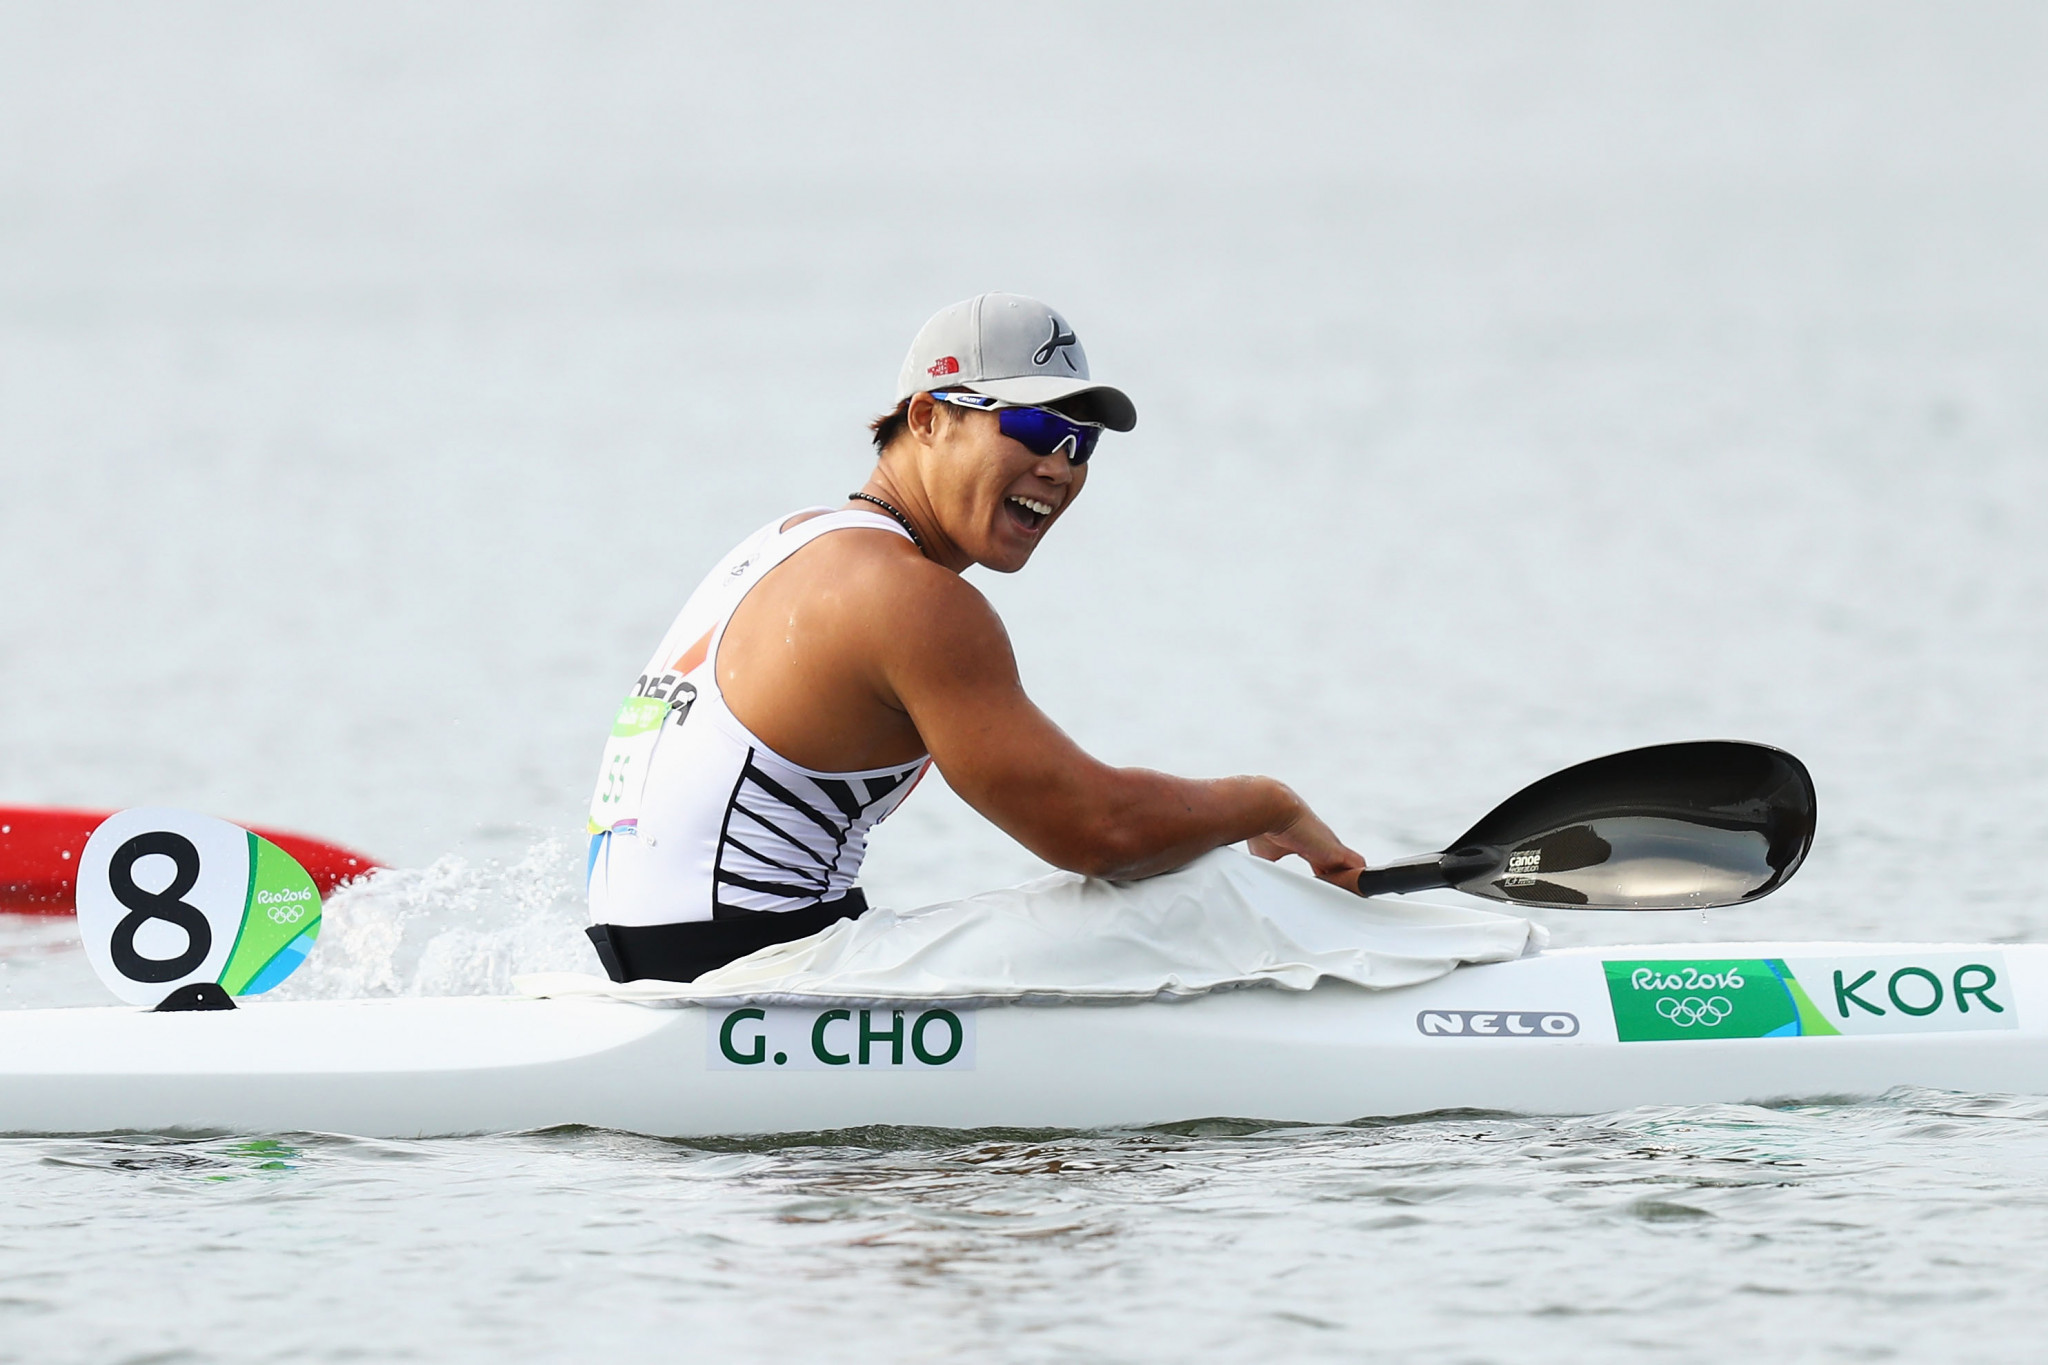 South Korea’s Cho Gwang-hee secured a quota place for the men's K1 200m event ©Getty Images